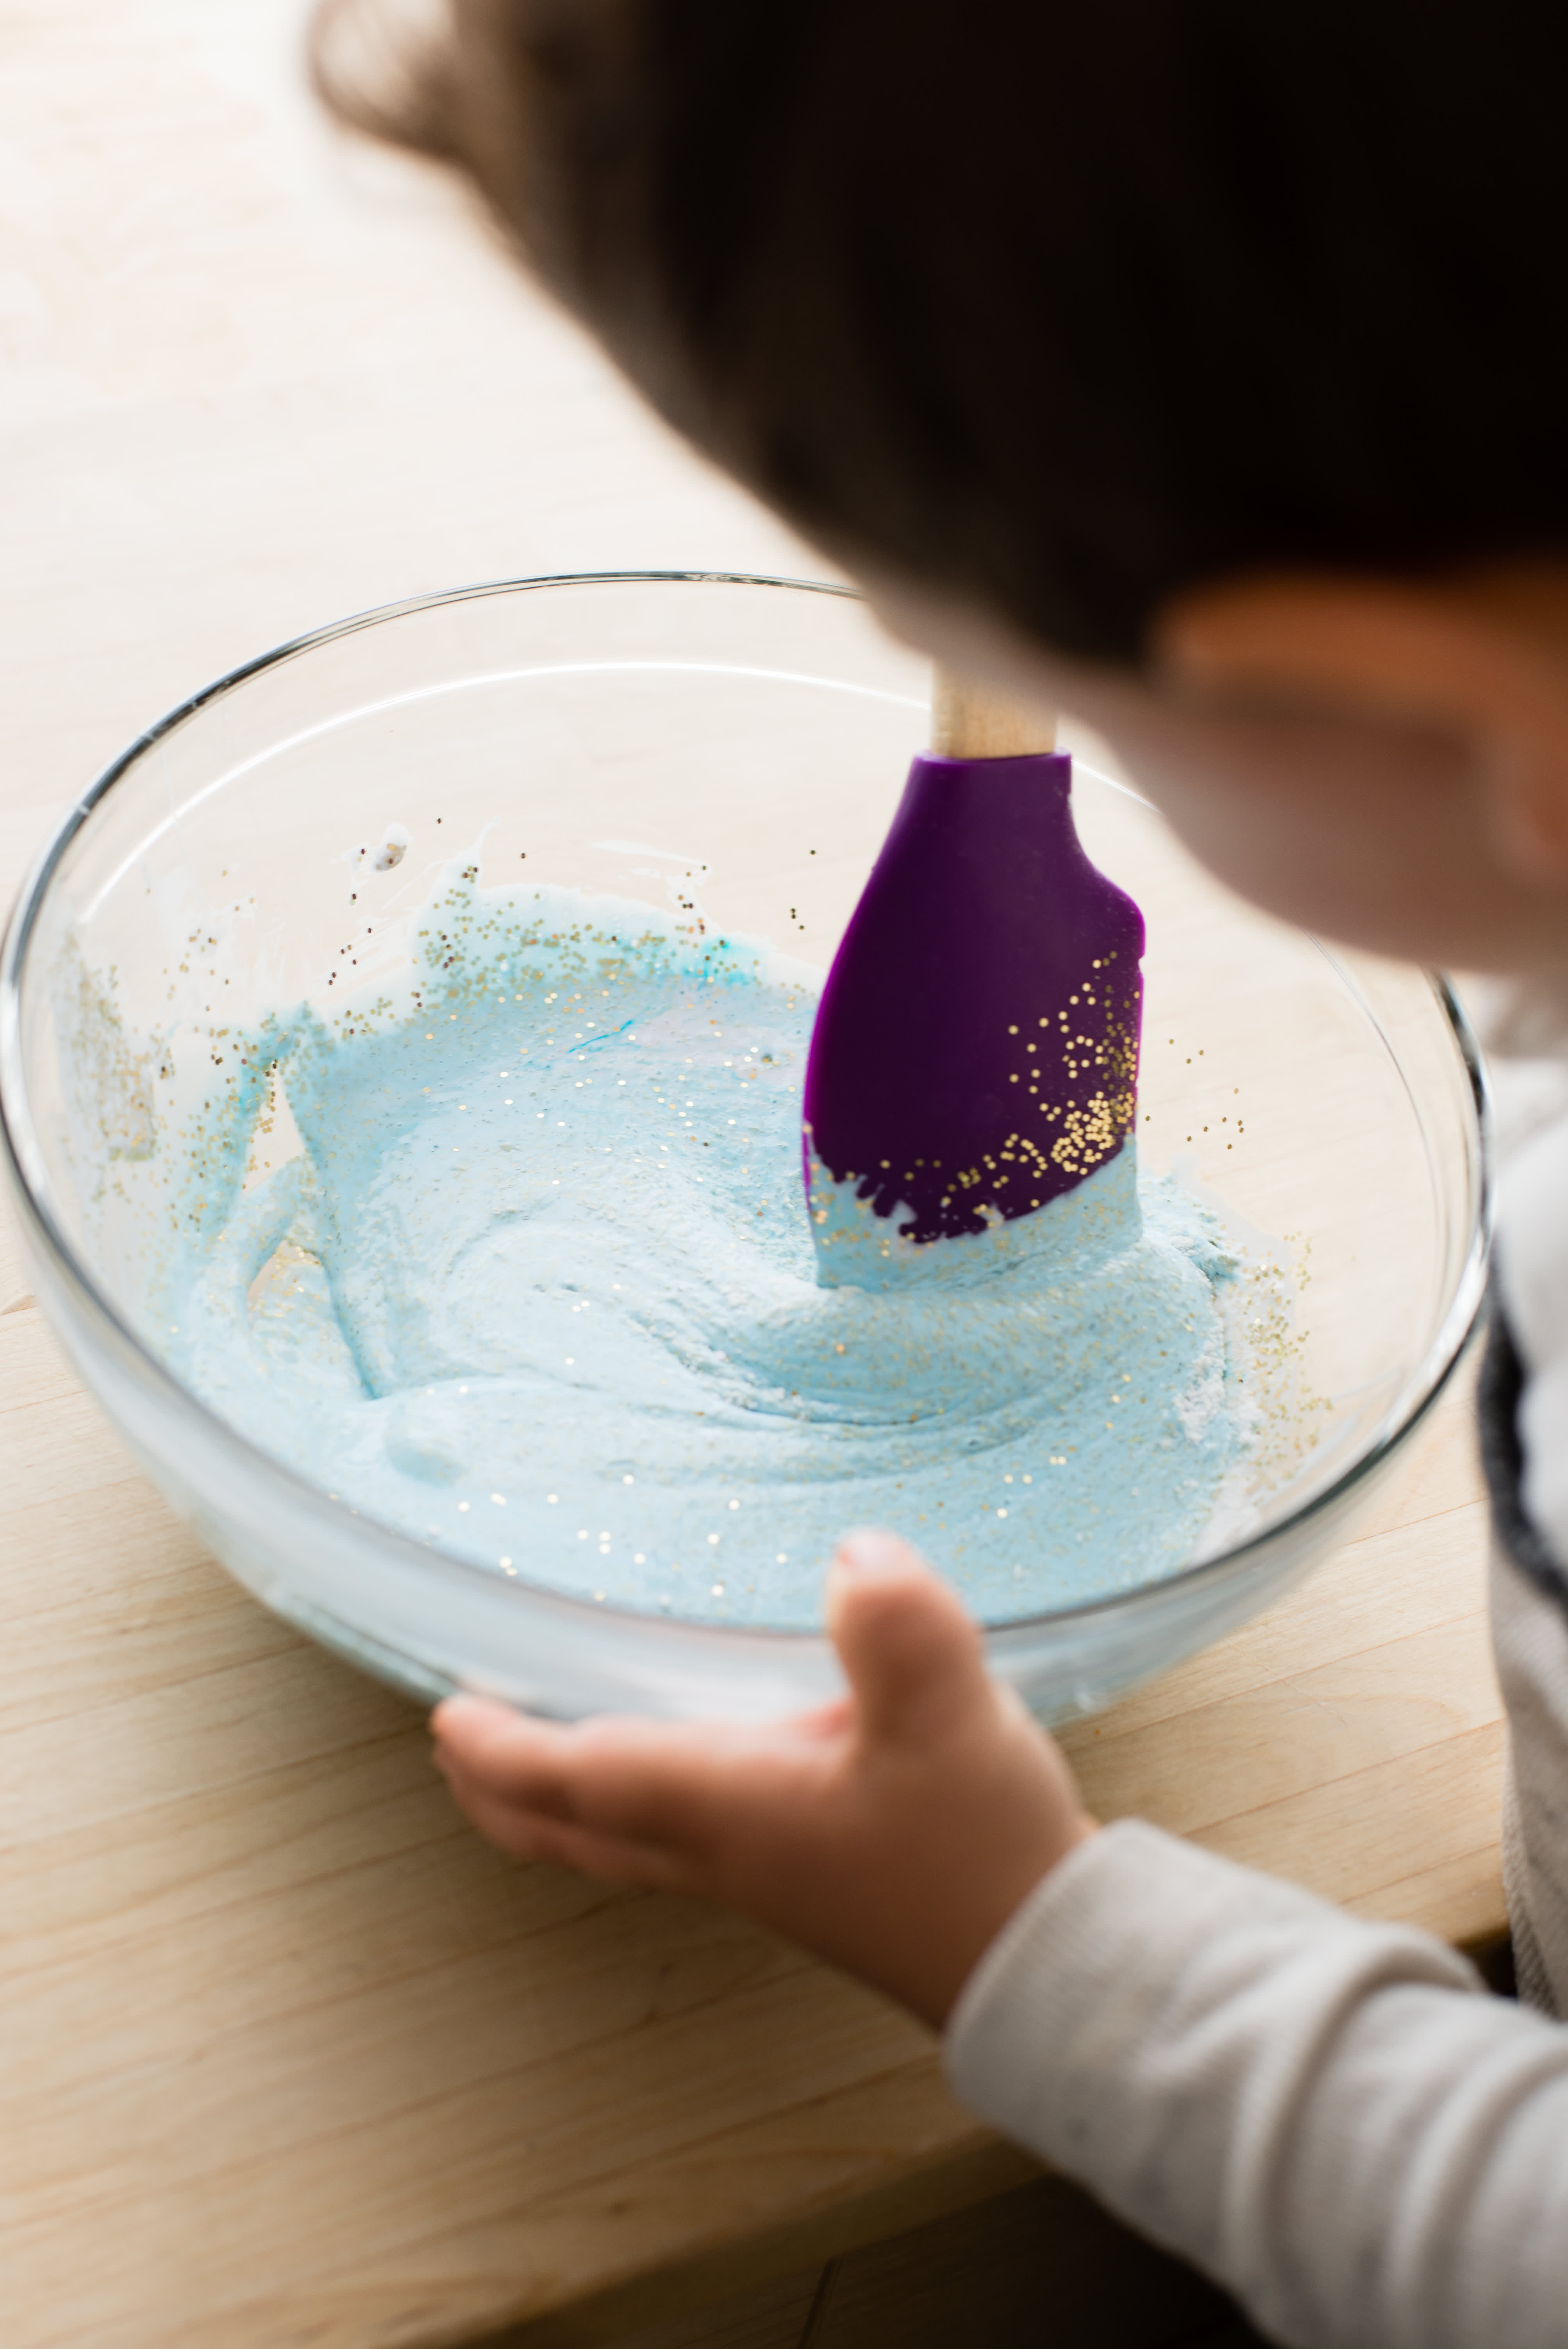 How To Make 3Ingredient Slime Without Borax Kitchn